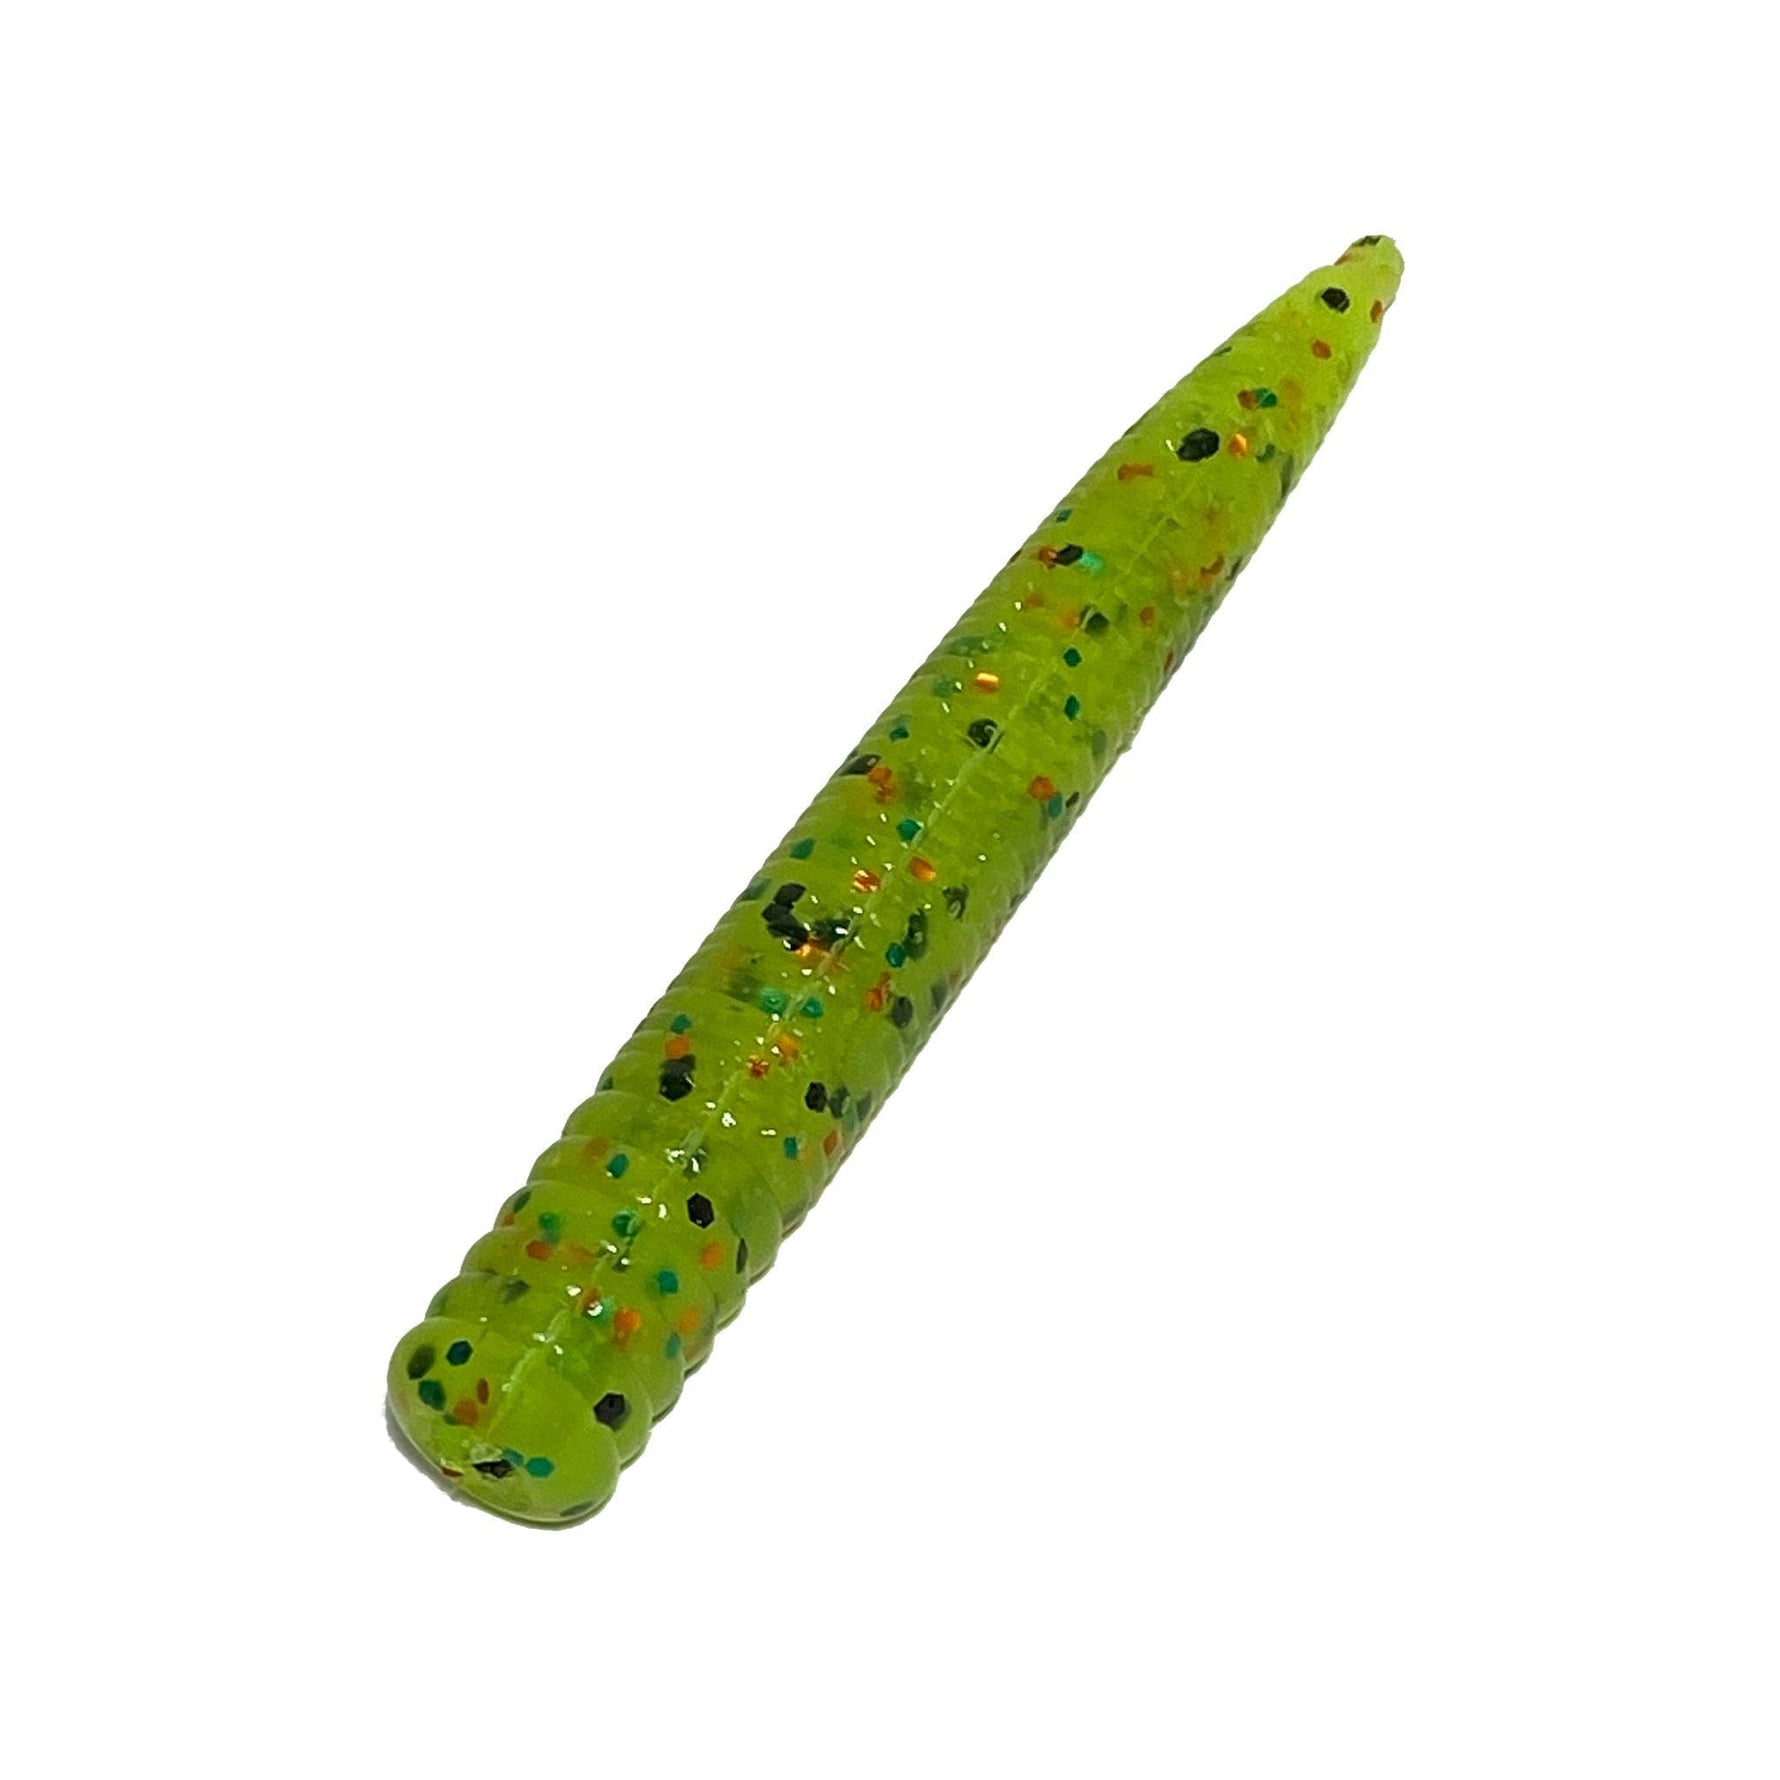 Obee 3" Ned Stick - Firetiger Chartreuse - Obee Fishing Co.